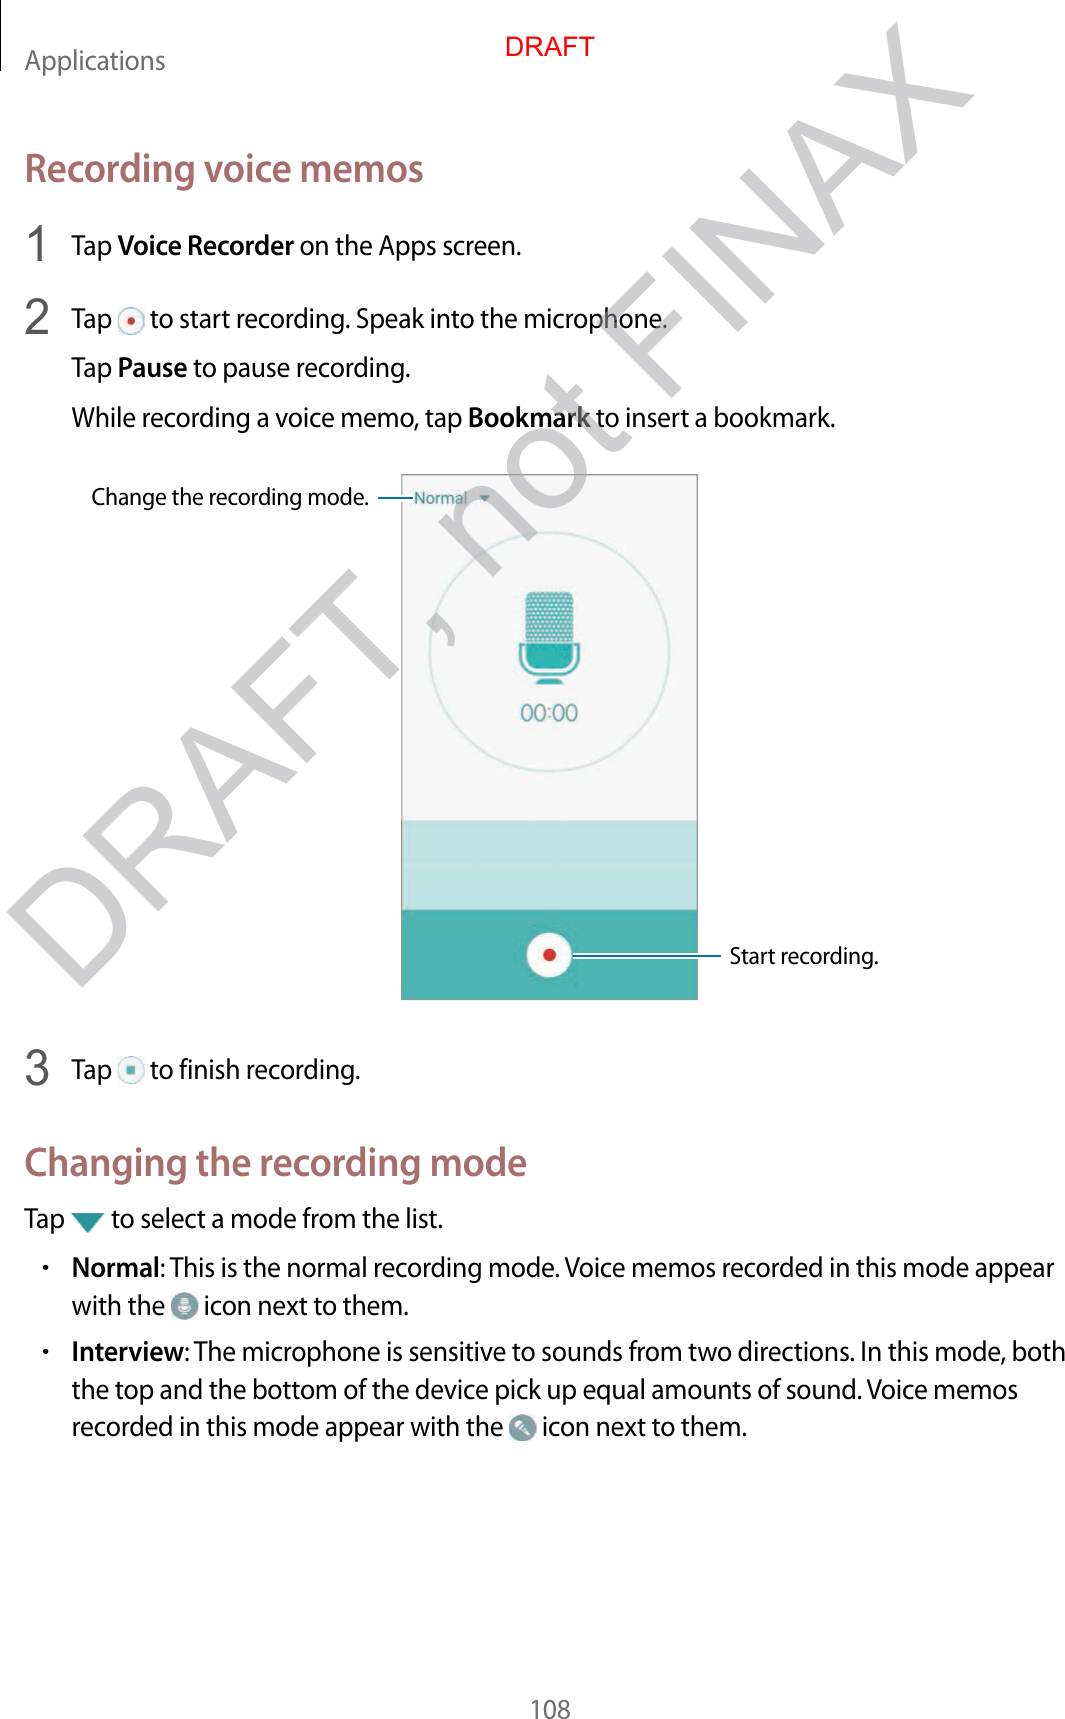 Applications108Recording voice memos1  Tap Voice Recorder on the Apps screen.2  Tap   to start recording. Speak into the microphone.Tap Pause to pause recording.While recording a voice memo, tap Bookmark to insert a bookmark.Change the recording mode.Start recording.3  Tap   to finish recording.Changing the recording modeTap   to select a mode from the list.•Normal: This is the normal recording mode. Voice memos recorded in this mode appear with the   icon next to them.•Interview: The microphone is sensitive to sounds from two directions. In this mode, both the top and the bottom of the device pick up equal amounts of sound. Voice memos recorded in this mode appear with the   icon next to them.DRAFTDRAFT, not FINAX